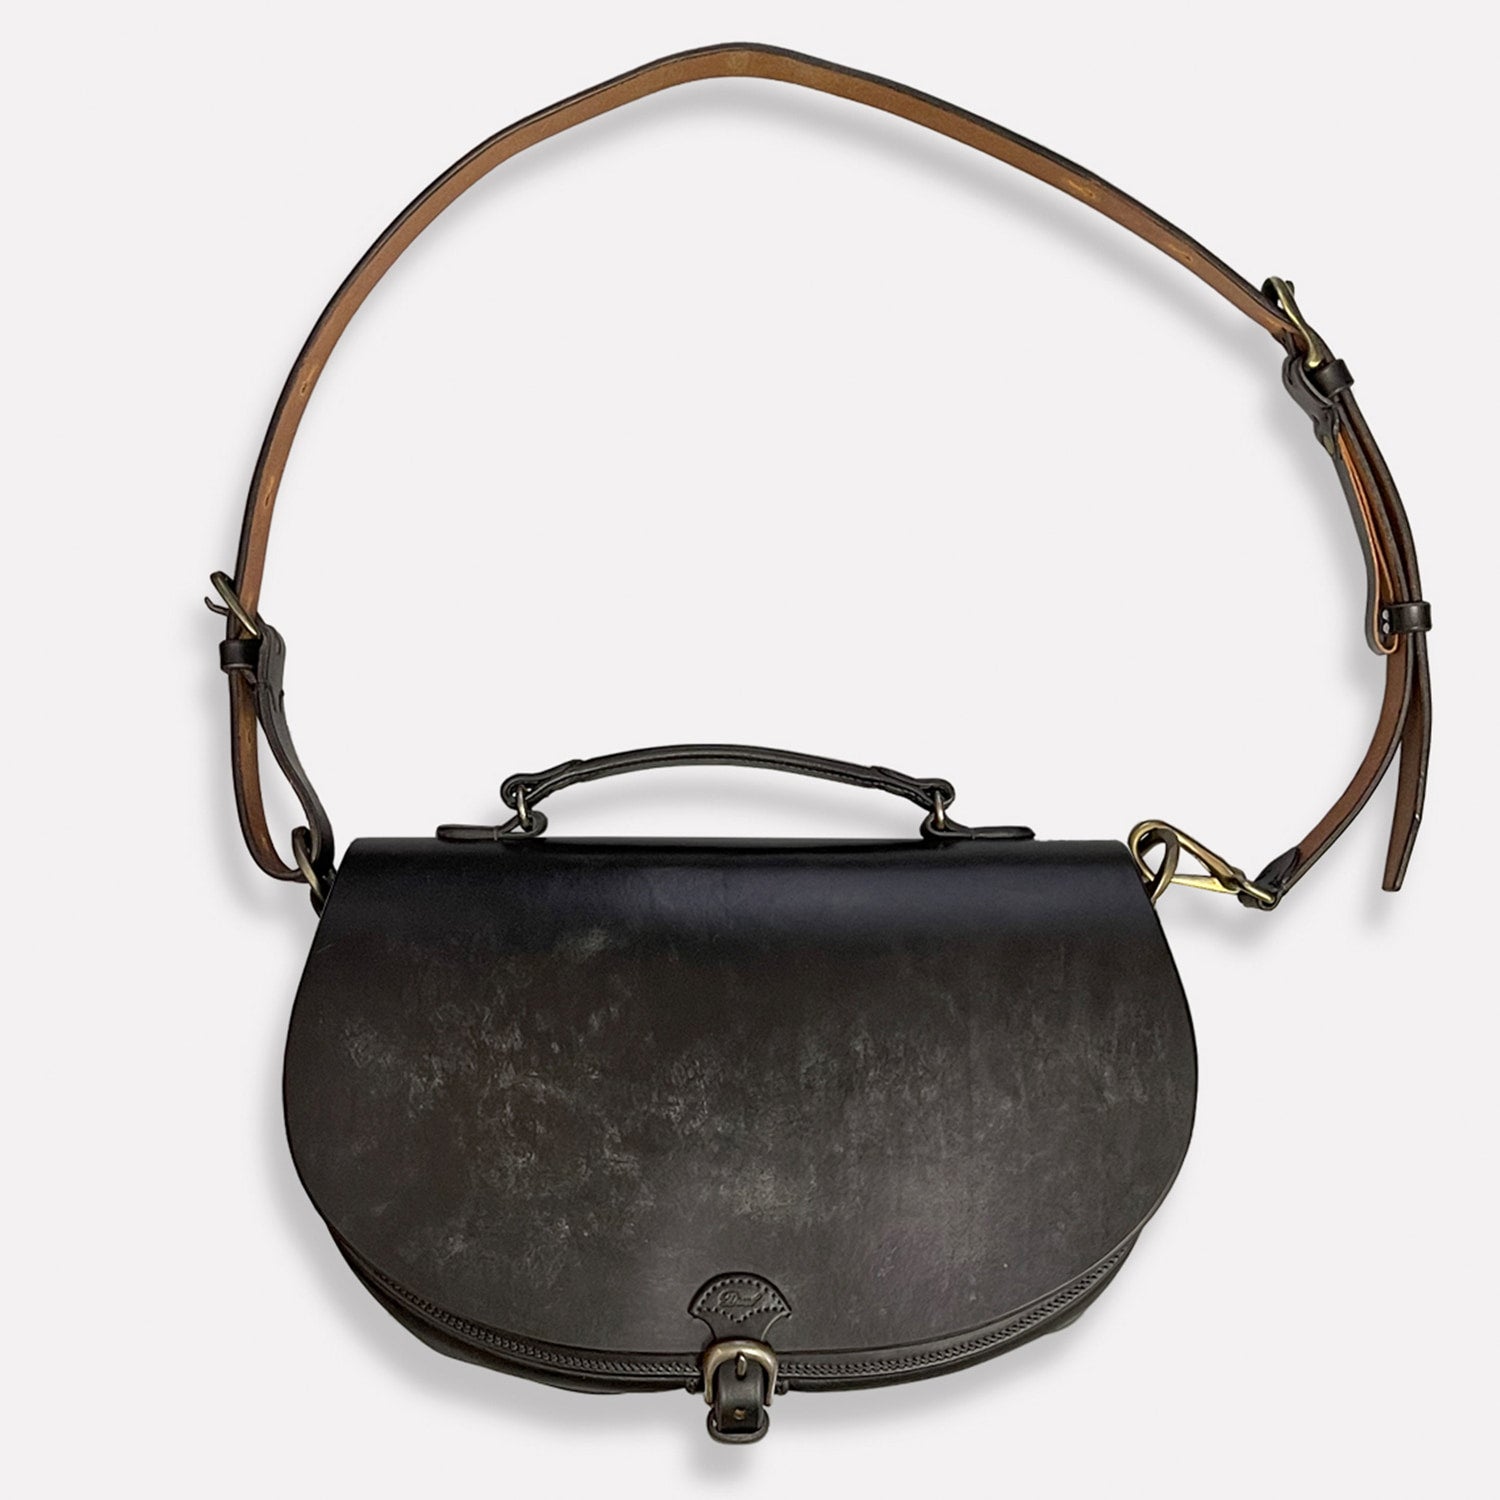 Dual / Ikenohata Ginzaten The finest saddle leather made by a long-established British tanner. Classic 2way shoulder bag 